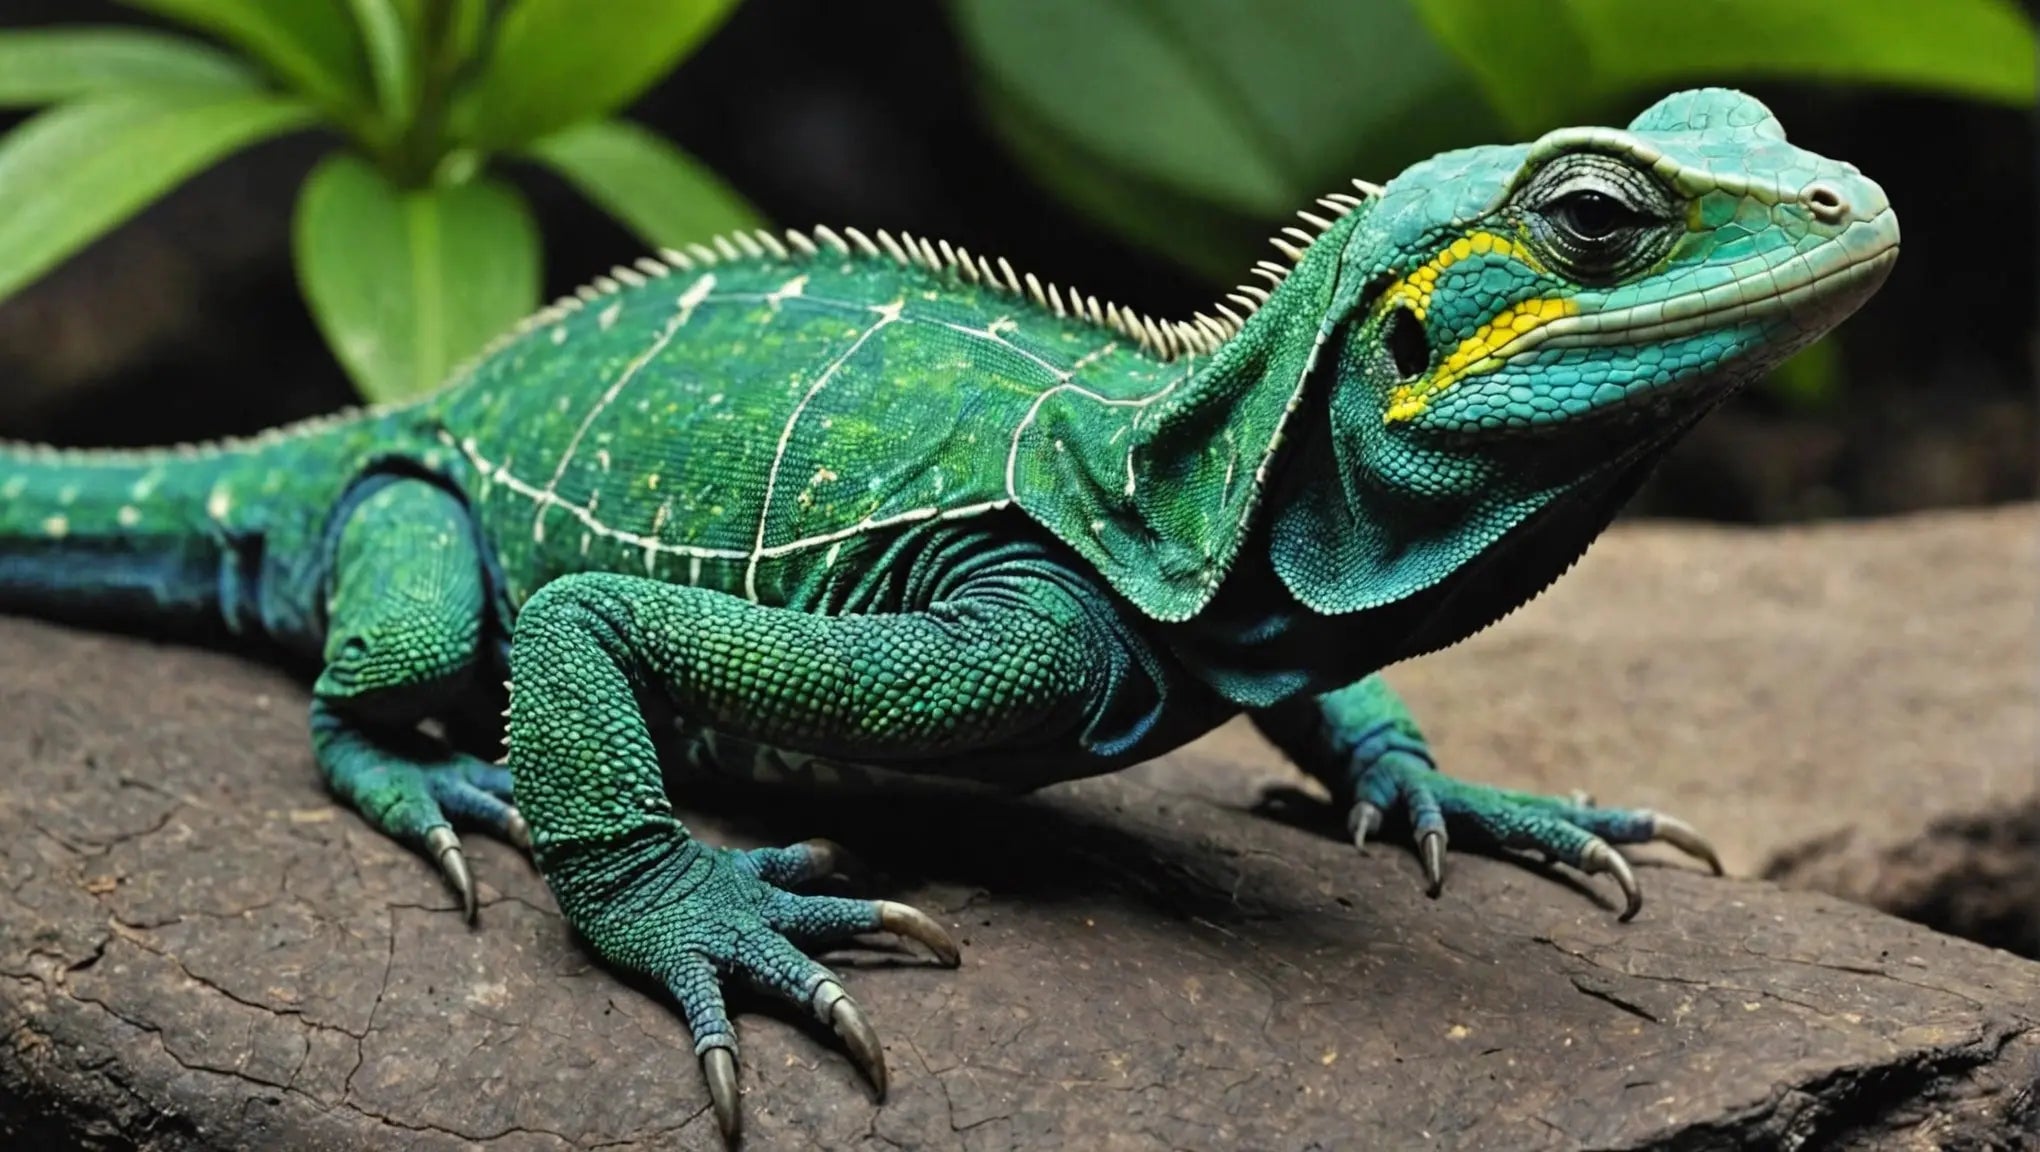 Galapagos Reptile Supplies - High-Quality Products for Your Reptile Needs